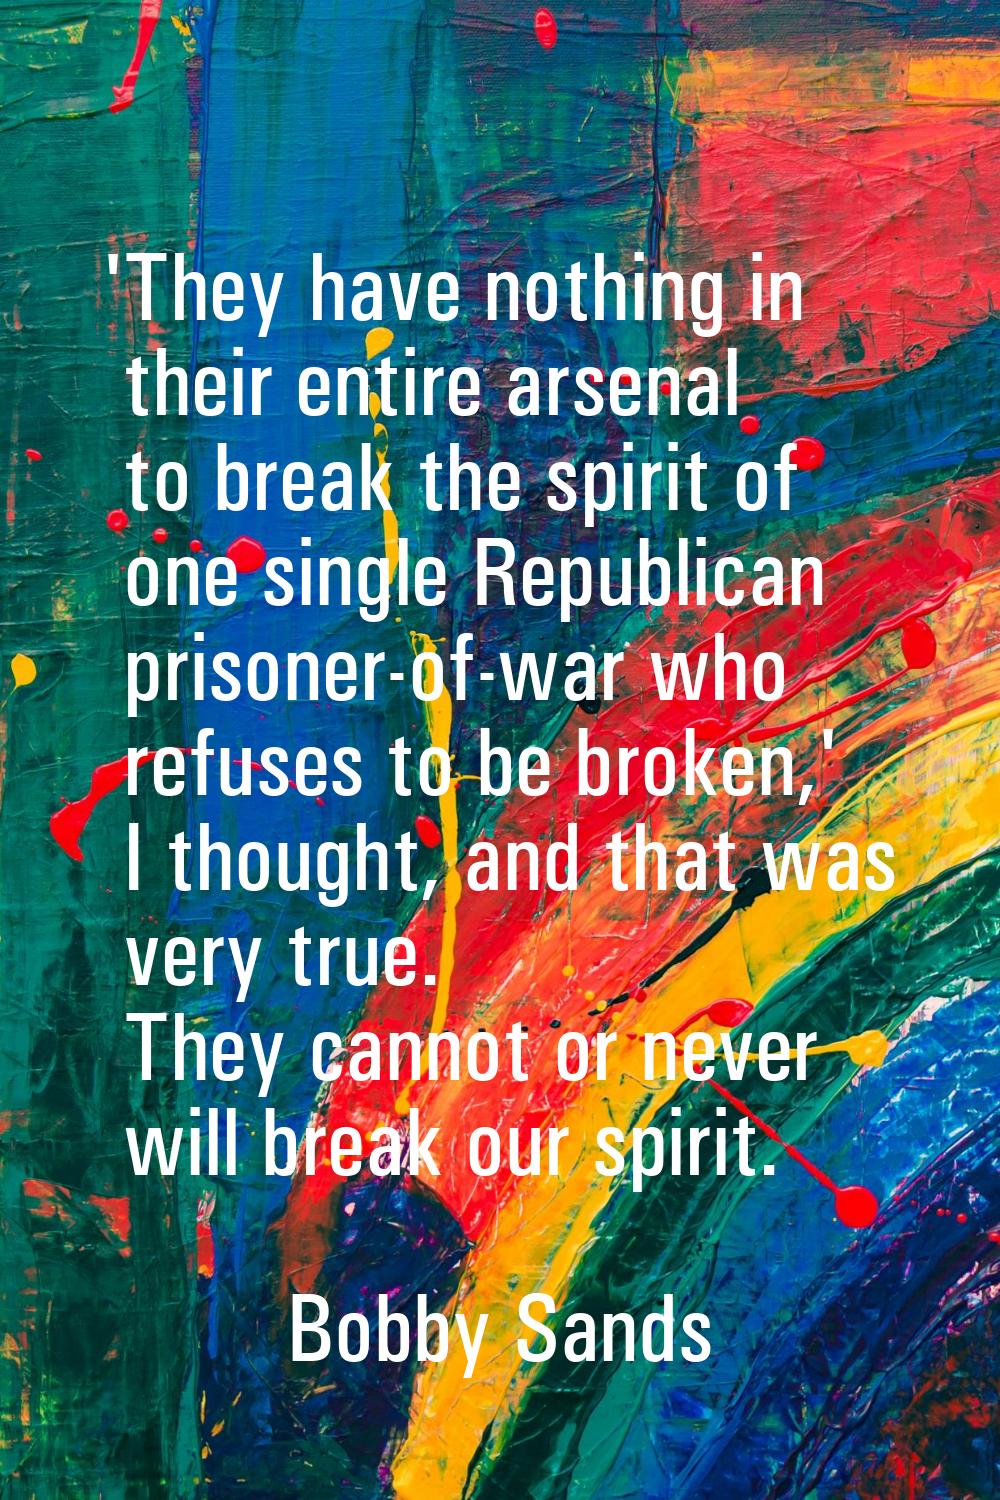 'They have nothing in their entire arsenal to break the spirit of one single Republican prisoner-of